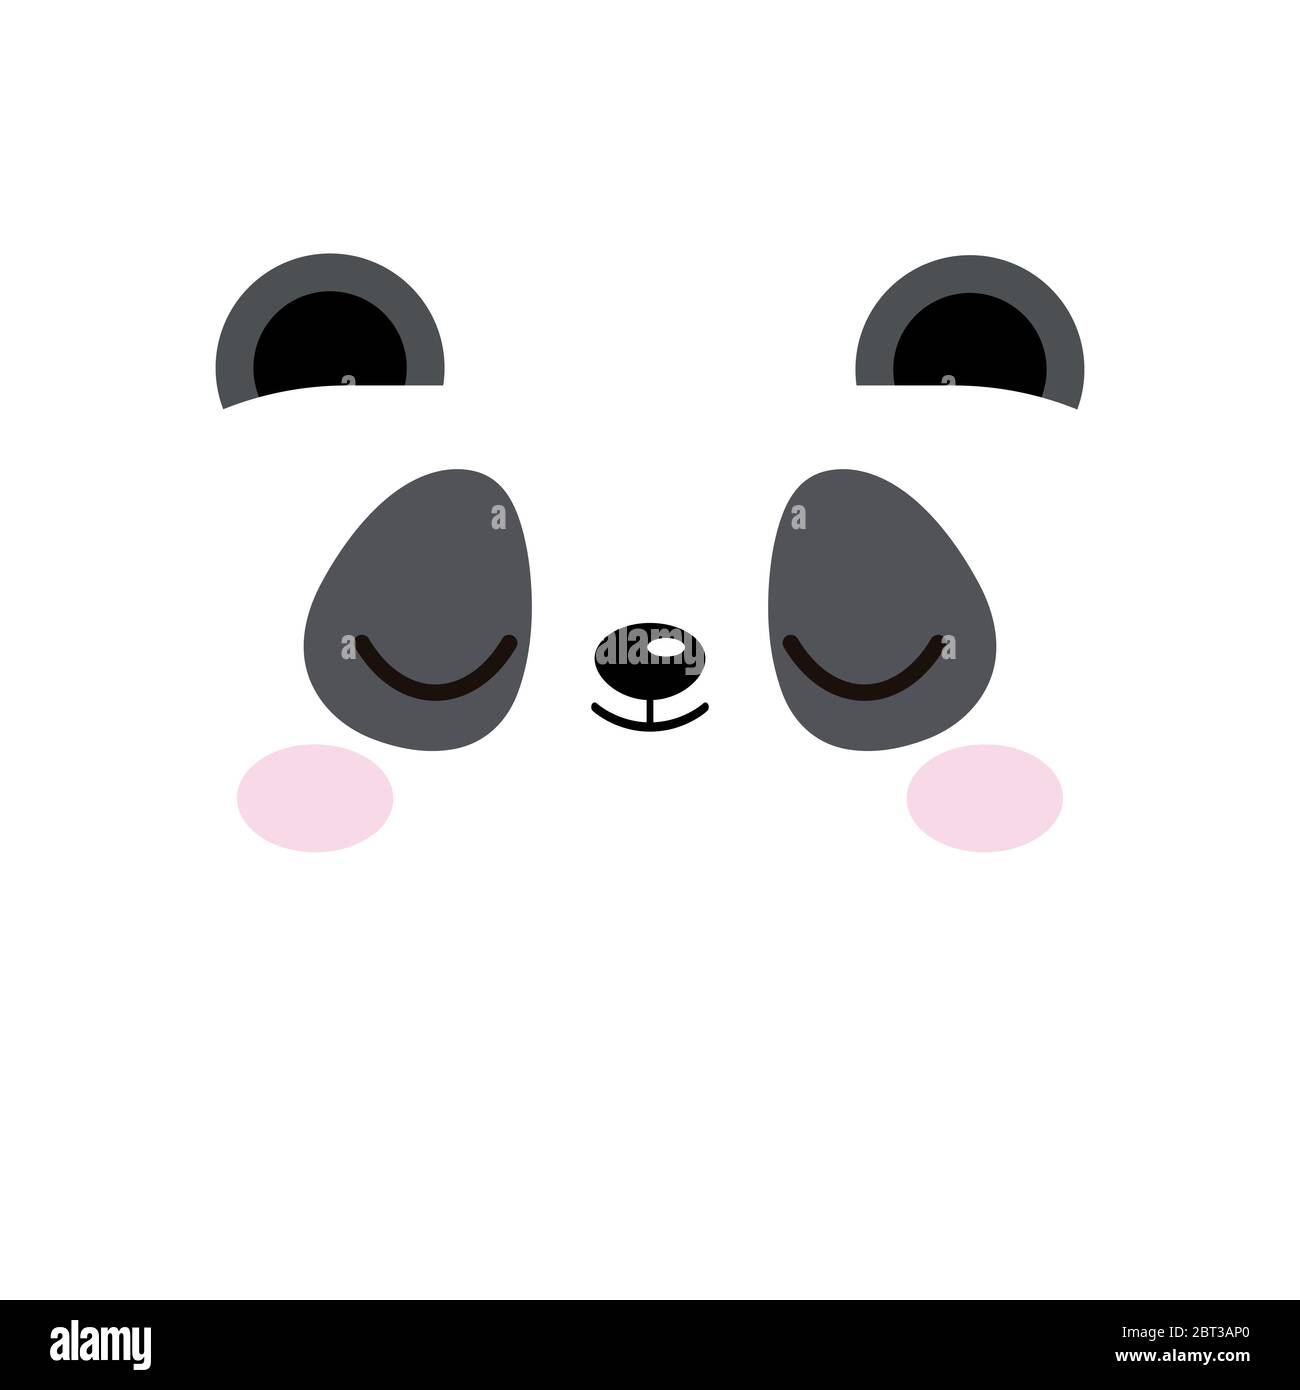 Cute sleeping panda bear emoji face poster isolated on white background. Stock Vector